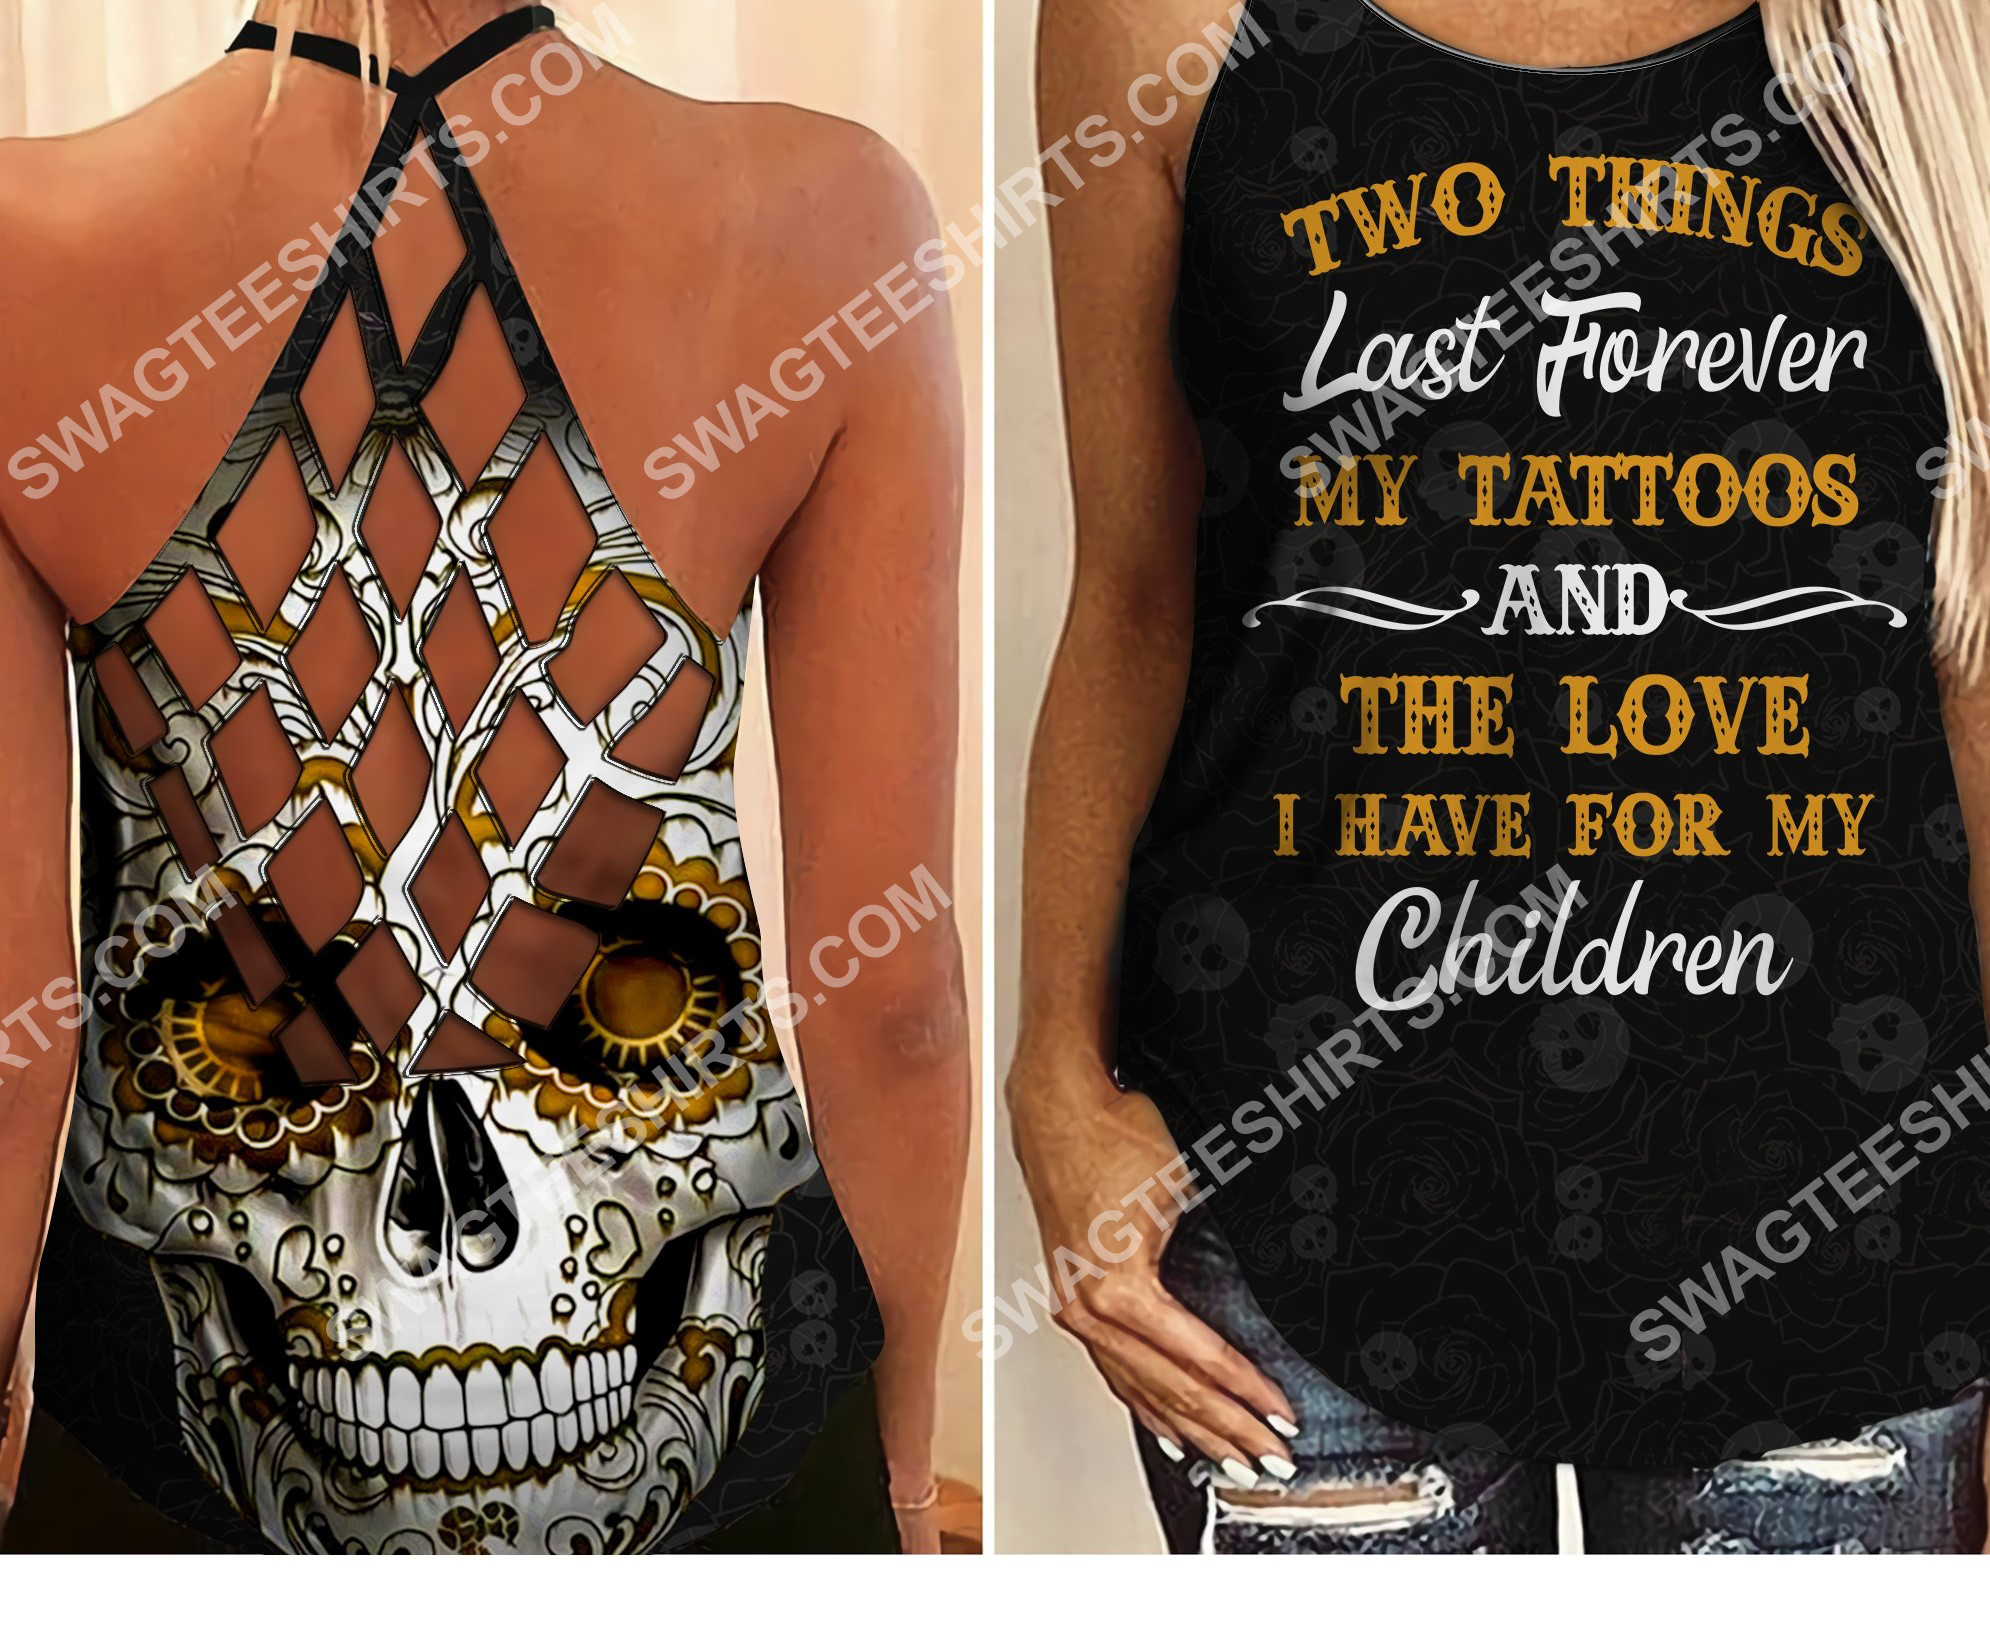 two things last forever my tattoos the love i have for my children criss-cross tank top 2 - Copy